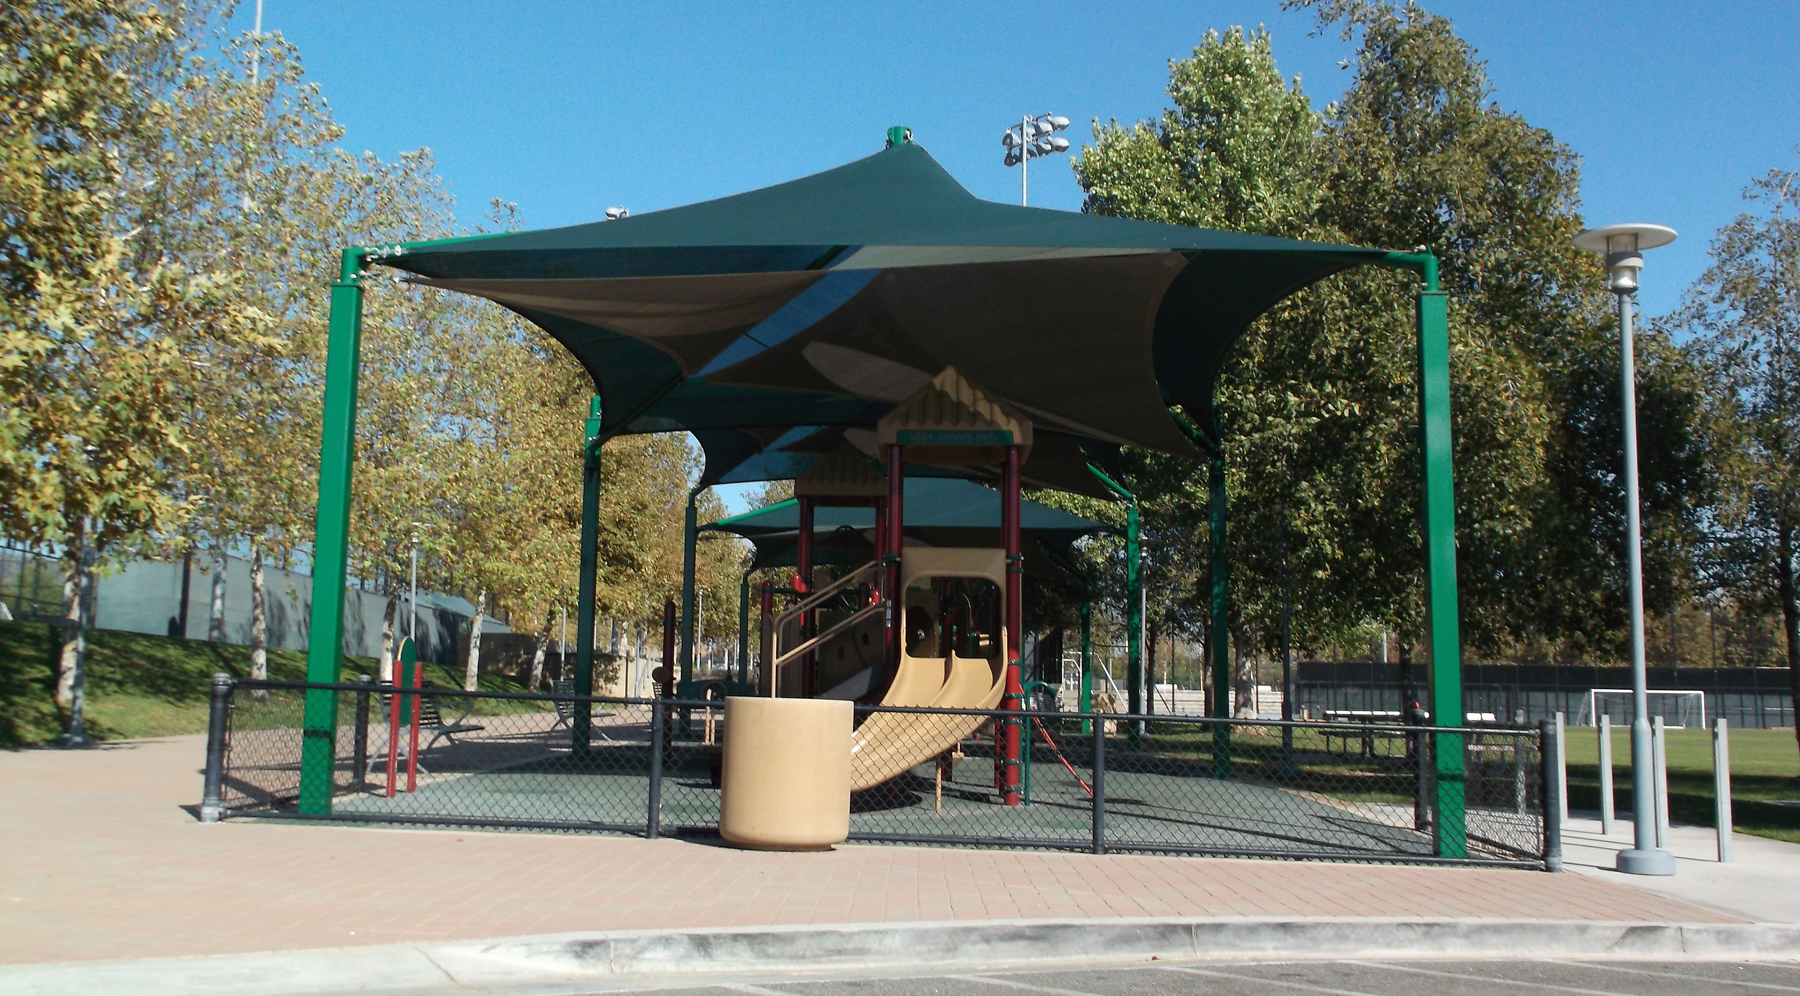 USA SHADE shade structure for a playground